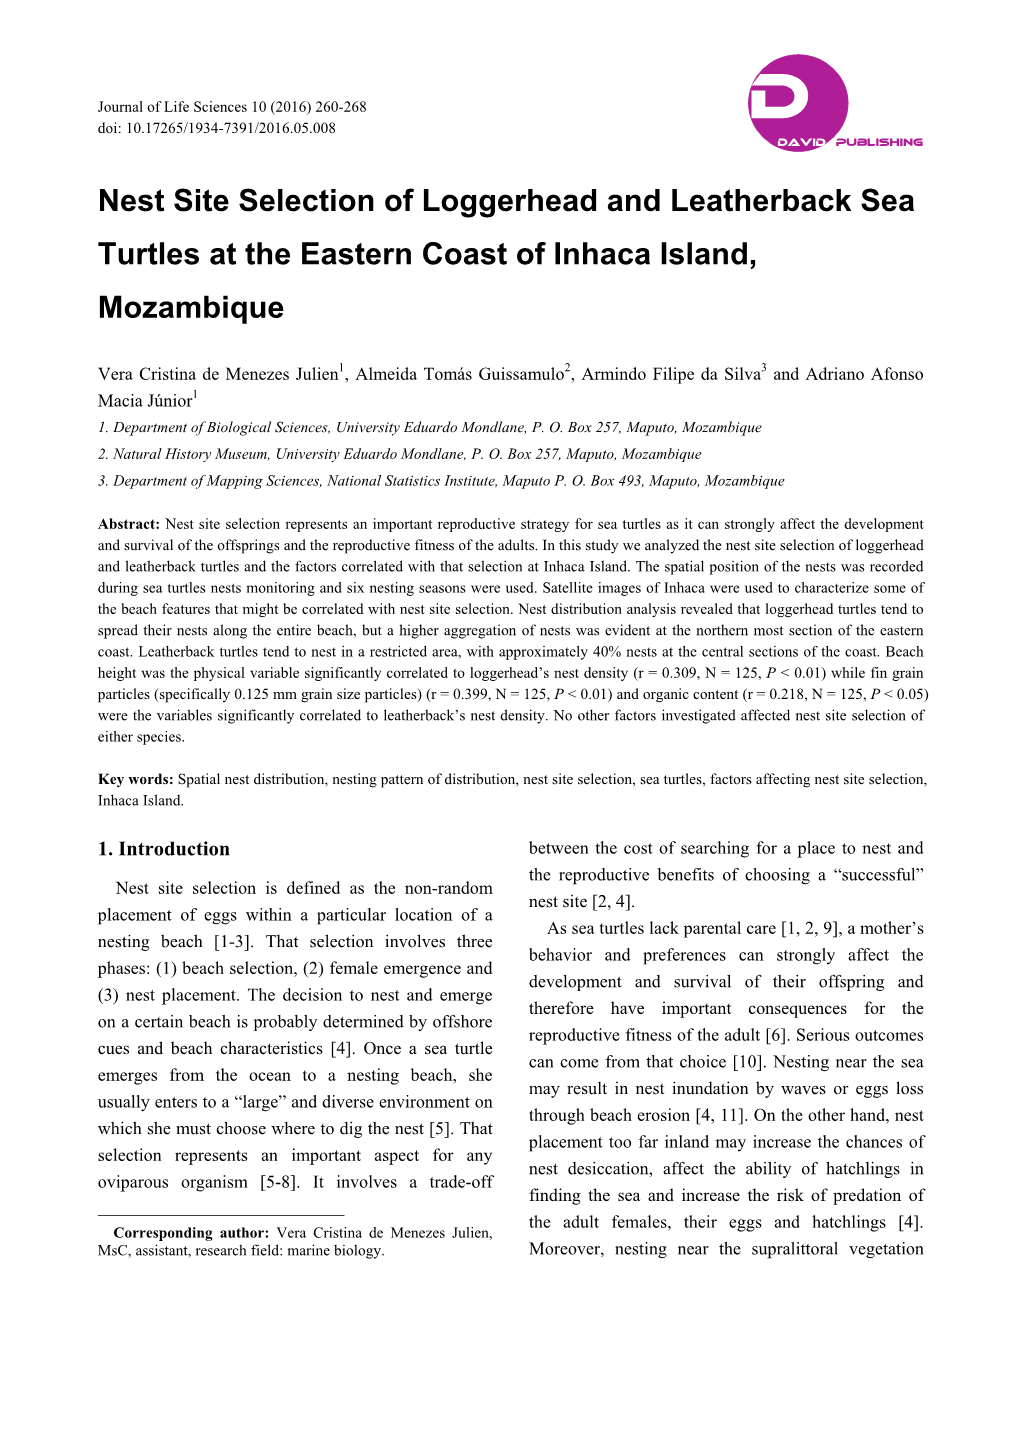 Nest Site Selection of Loggerhead and Leatherback Sea Turtles at the Eastern Coast of Inhaca Island, Mozambique